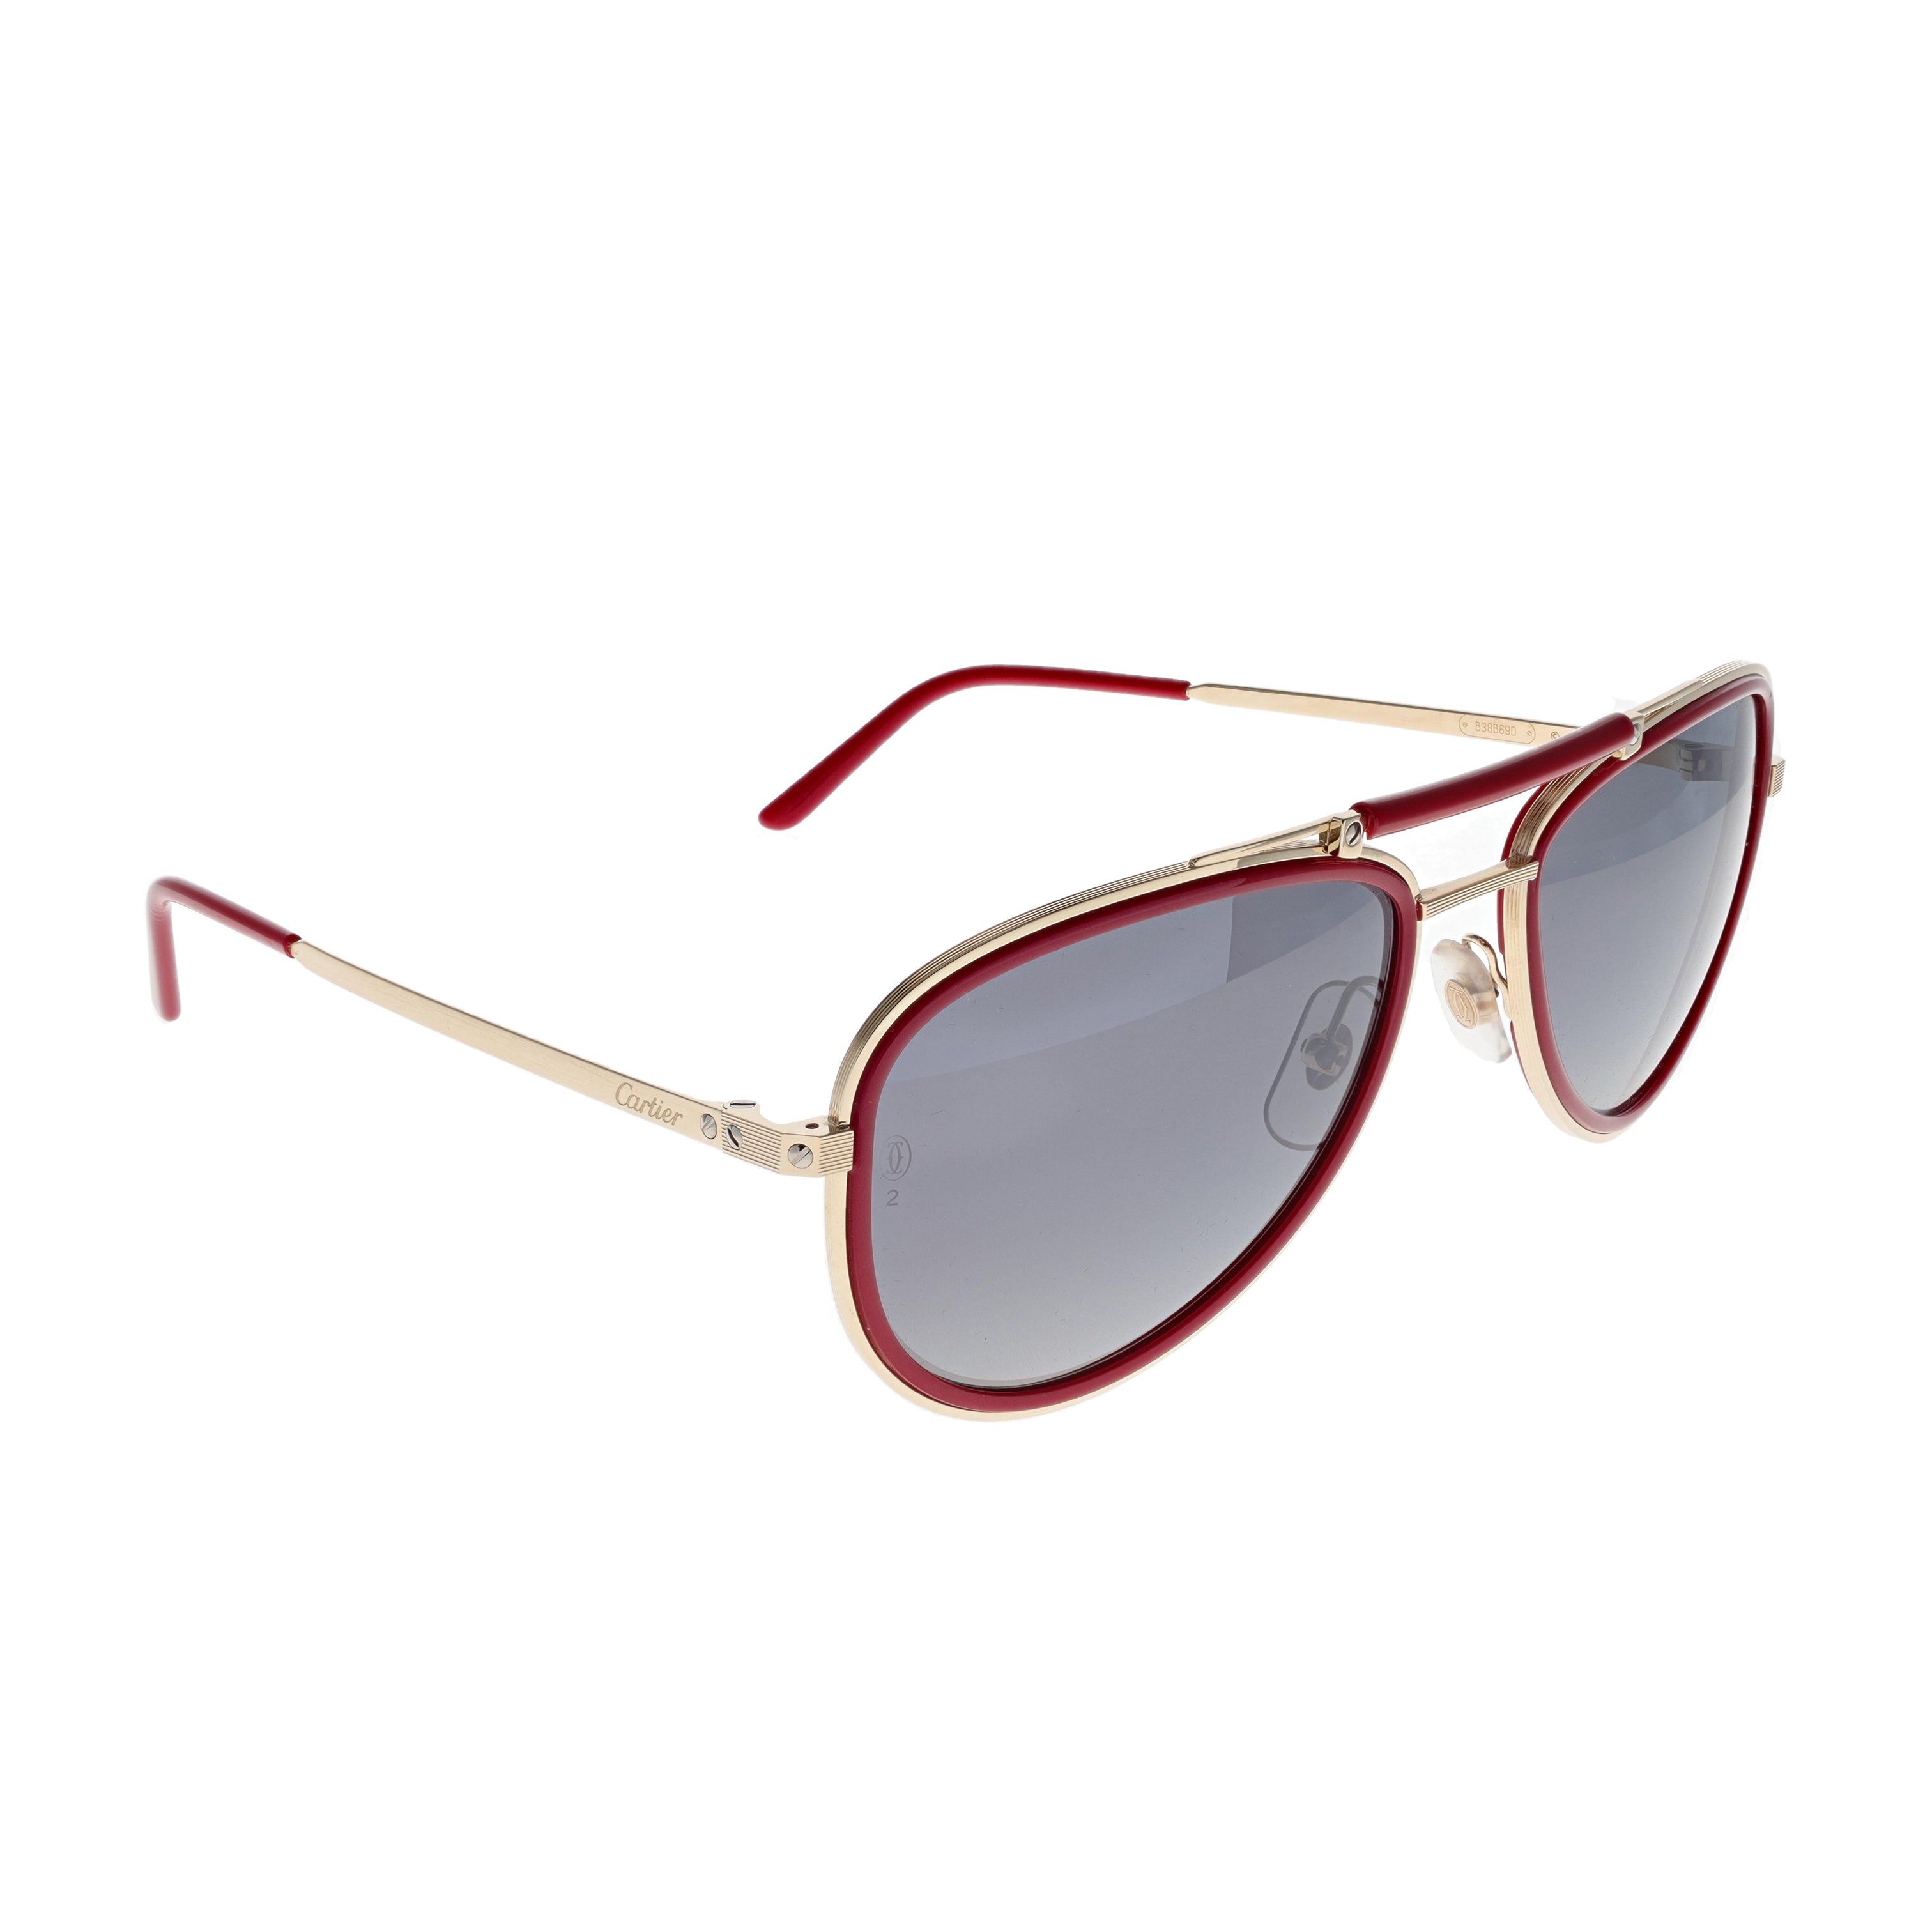 Cartier Sunglasses - CT0078S-001 - Red / Gold